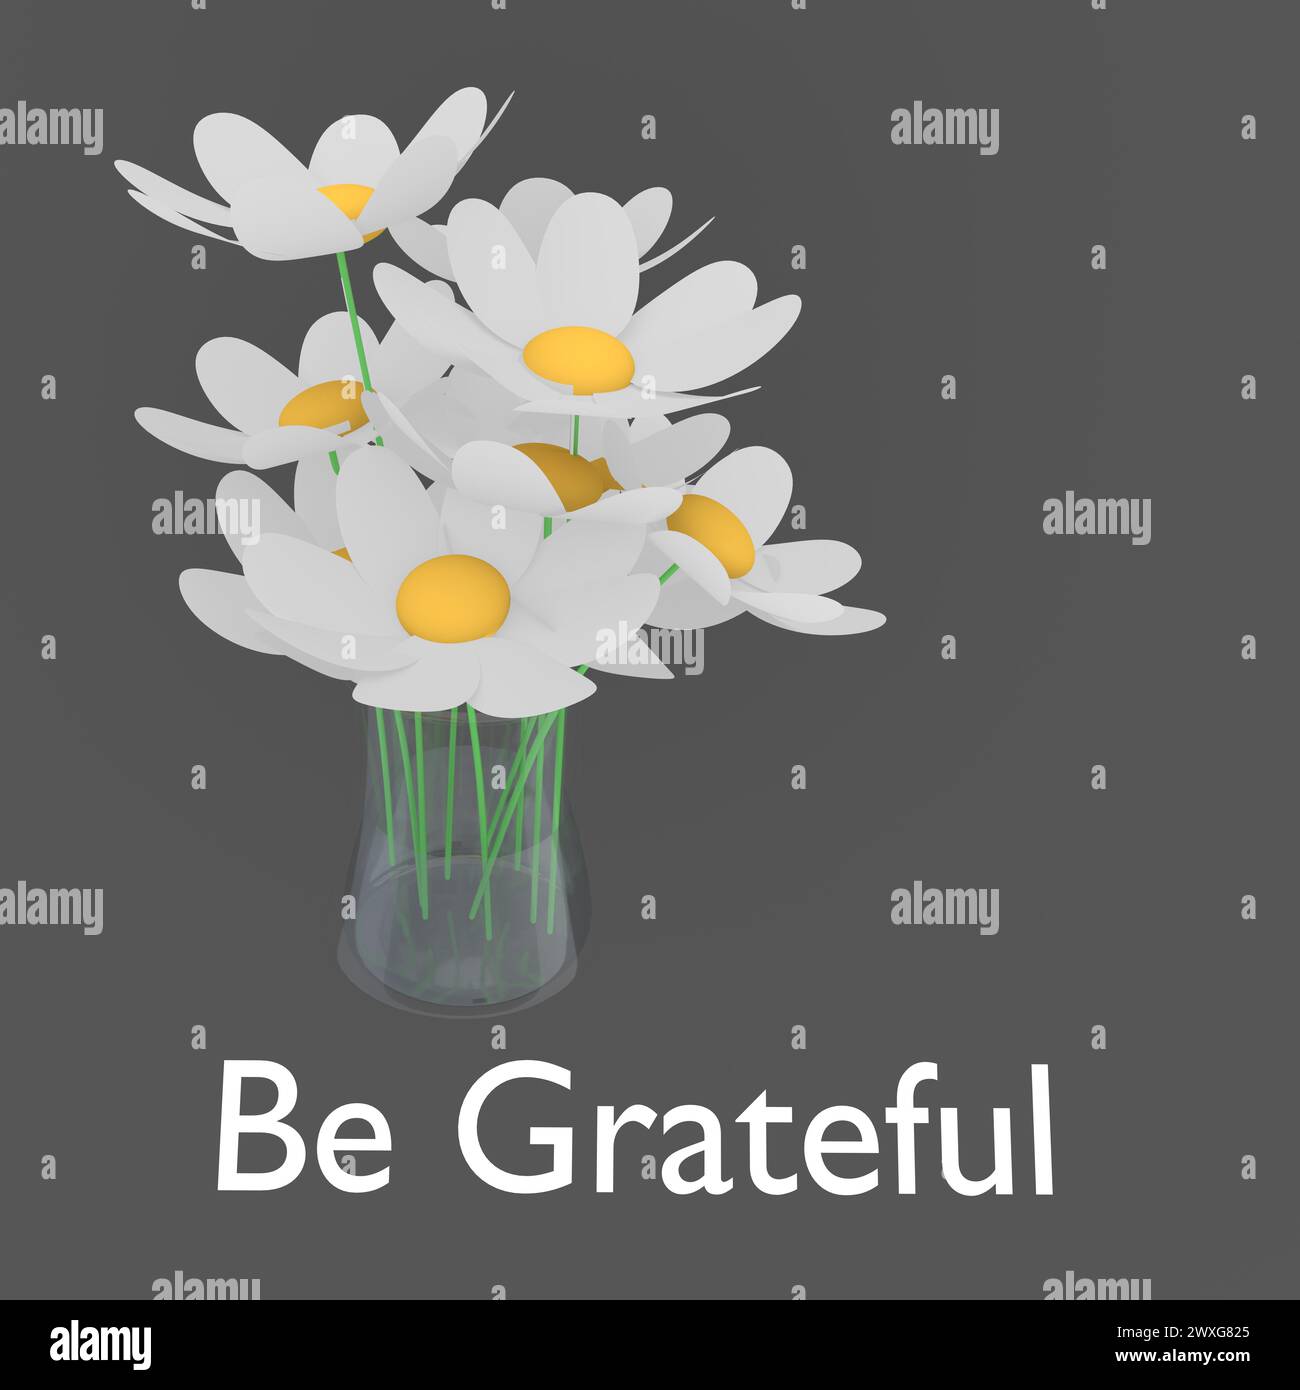 3d illustration of flowers in a glass, titled as Be Grateful. Stock Photo